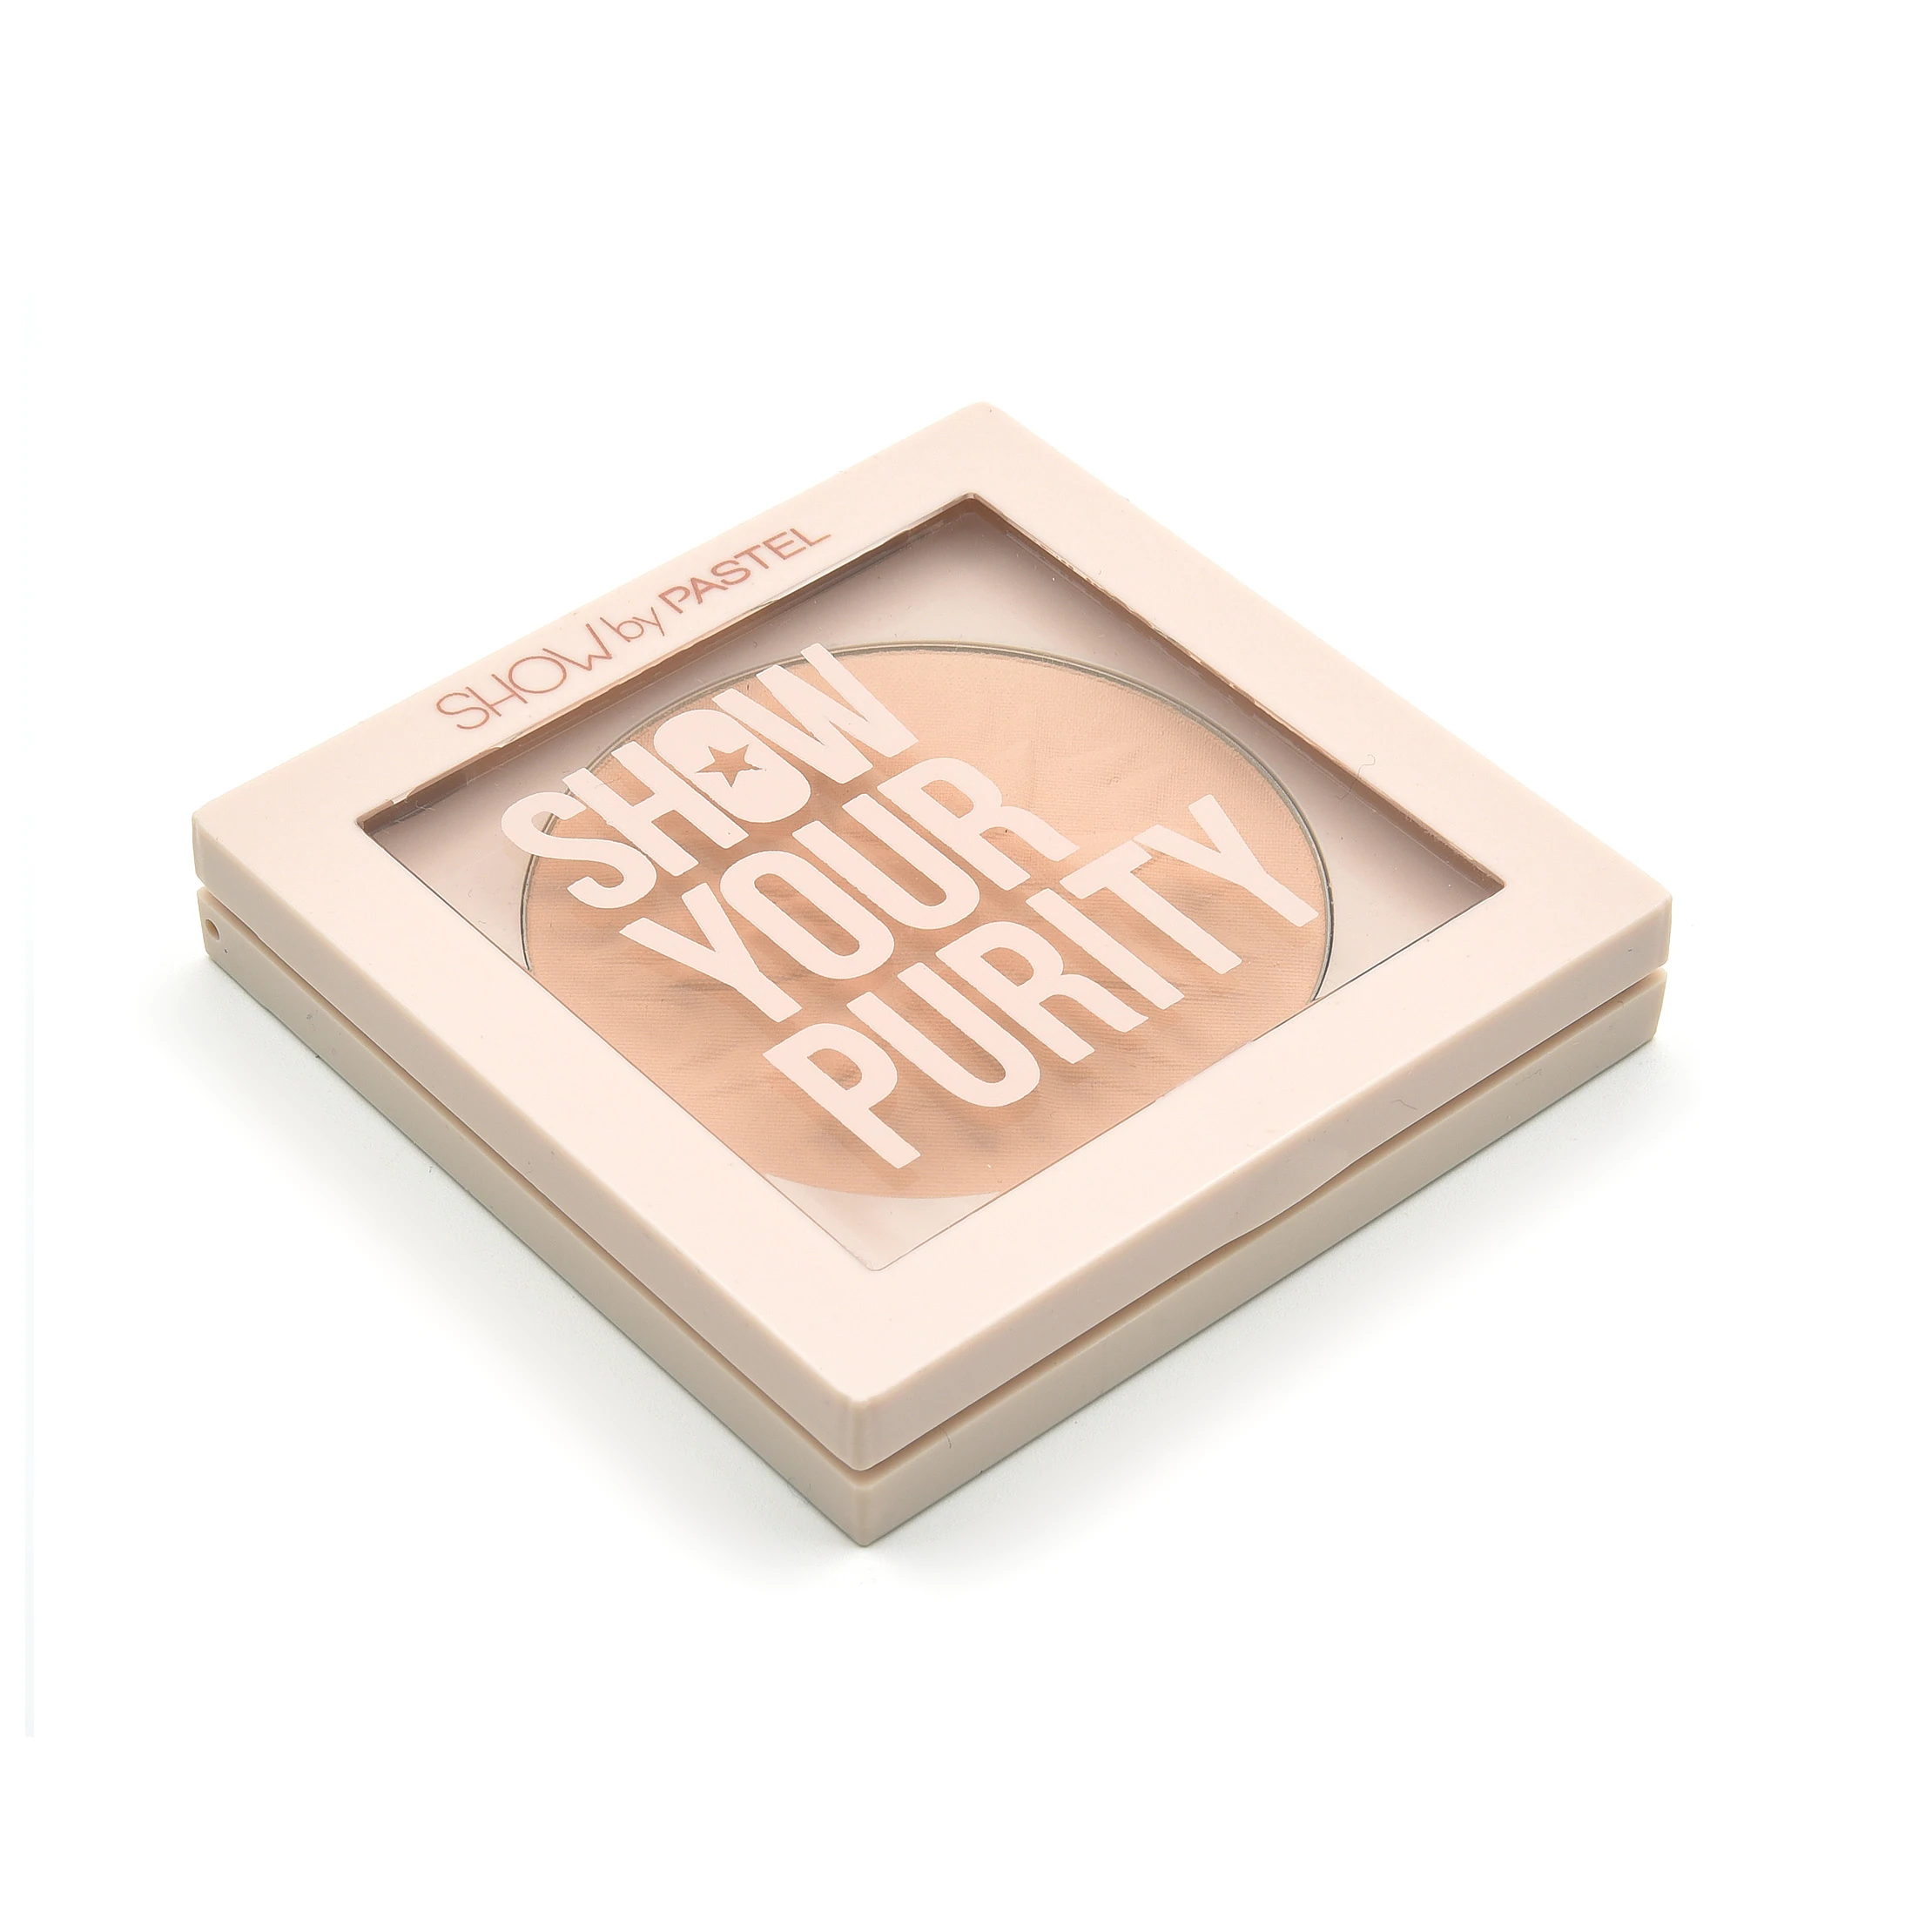 Pastel Show Your Purity Powder Pudra 102 Finish - Thumbnail